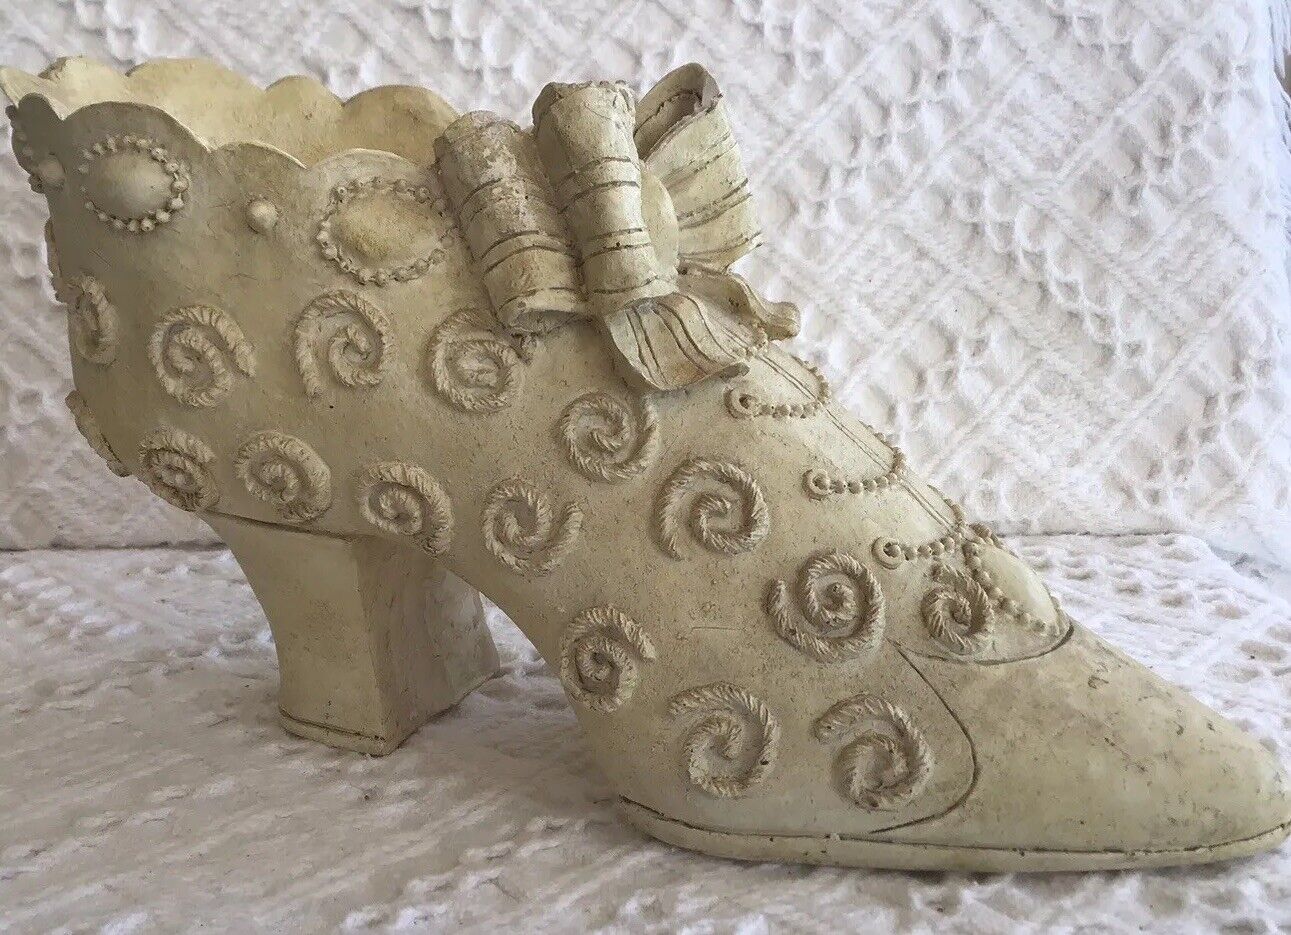 10.5” Shabby Chic Victorian/Edwardian? Shoe Boot Style Planter